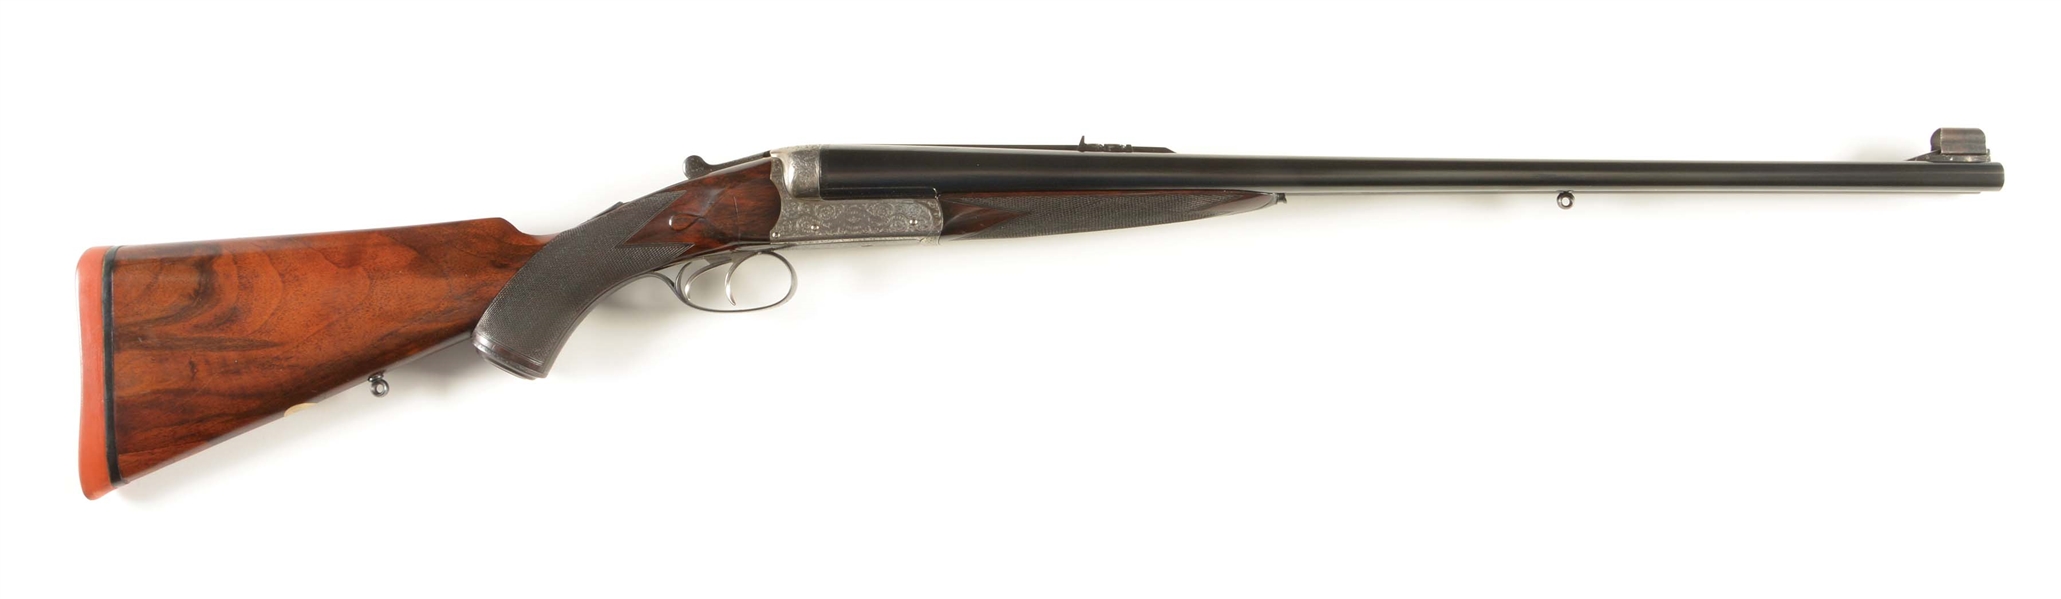 (C) E.M. REILLY BOXLOCK DOUBLE RIFLE IN .500/.465 NITRO EXPRESS WITH AMMO.